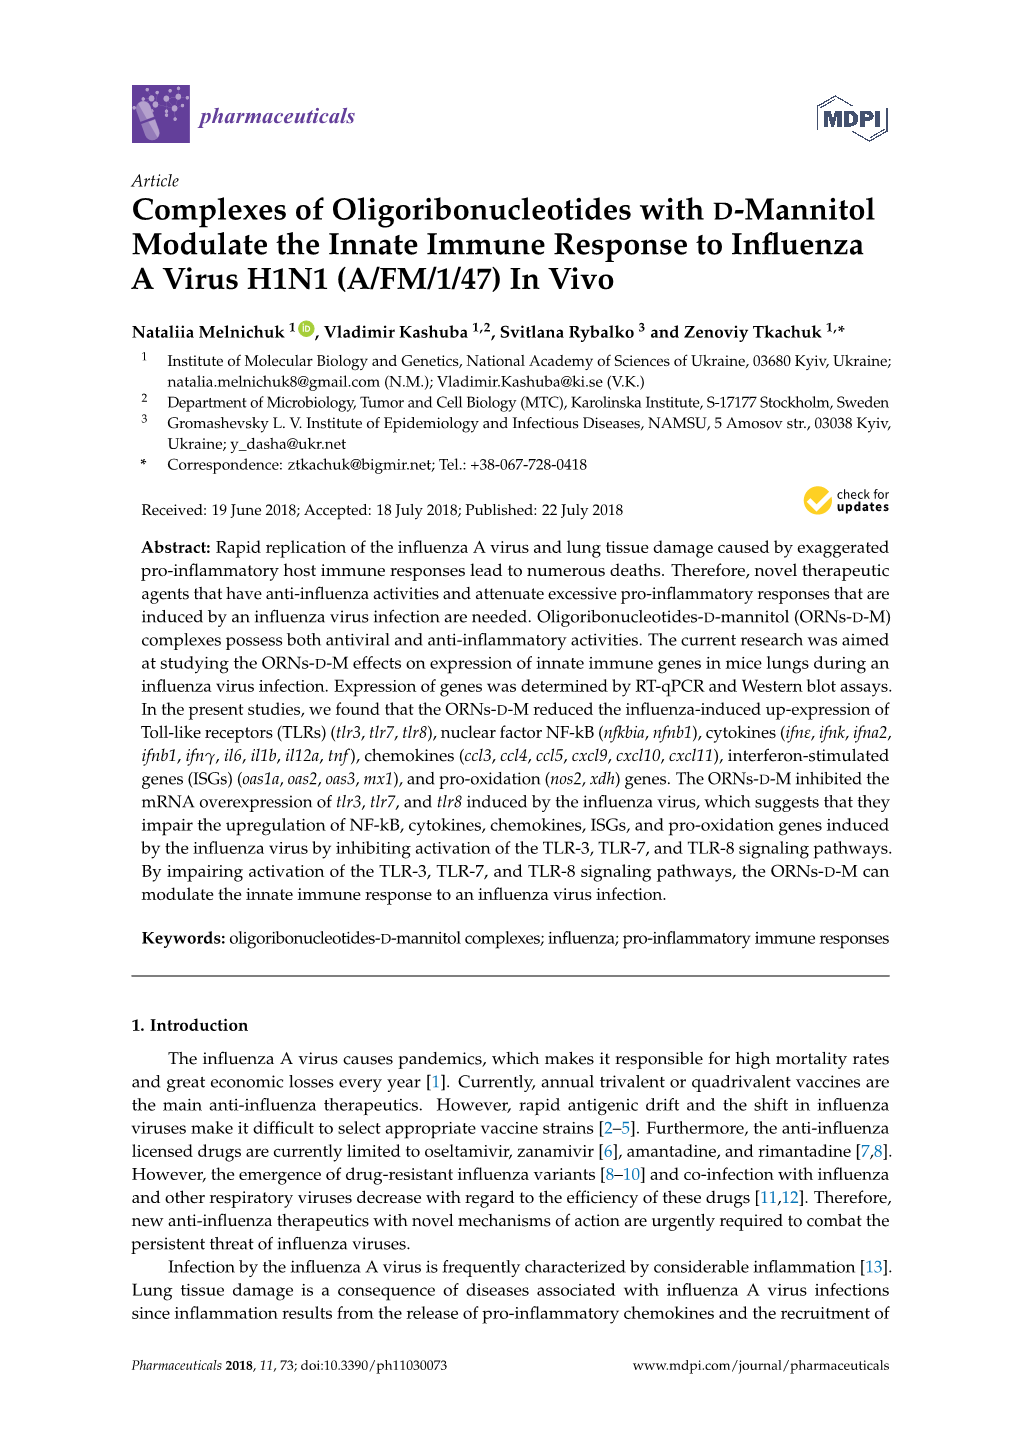 Complexes of Oligoribonucleotides with D-Mannitol Modulate the Innate Immune Response to Influenza a Virus H1N1